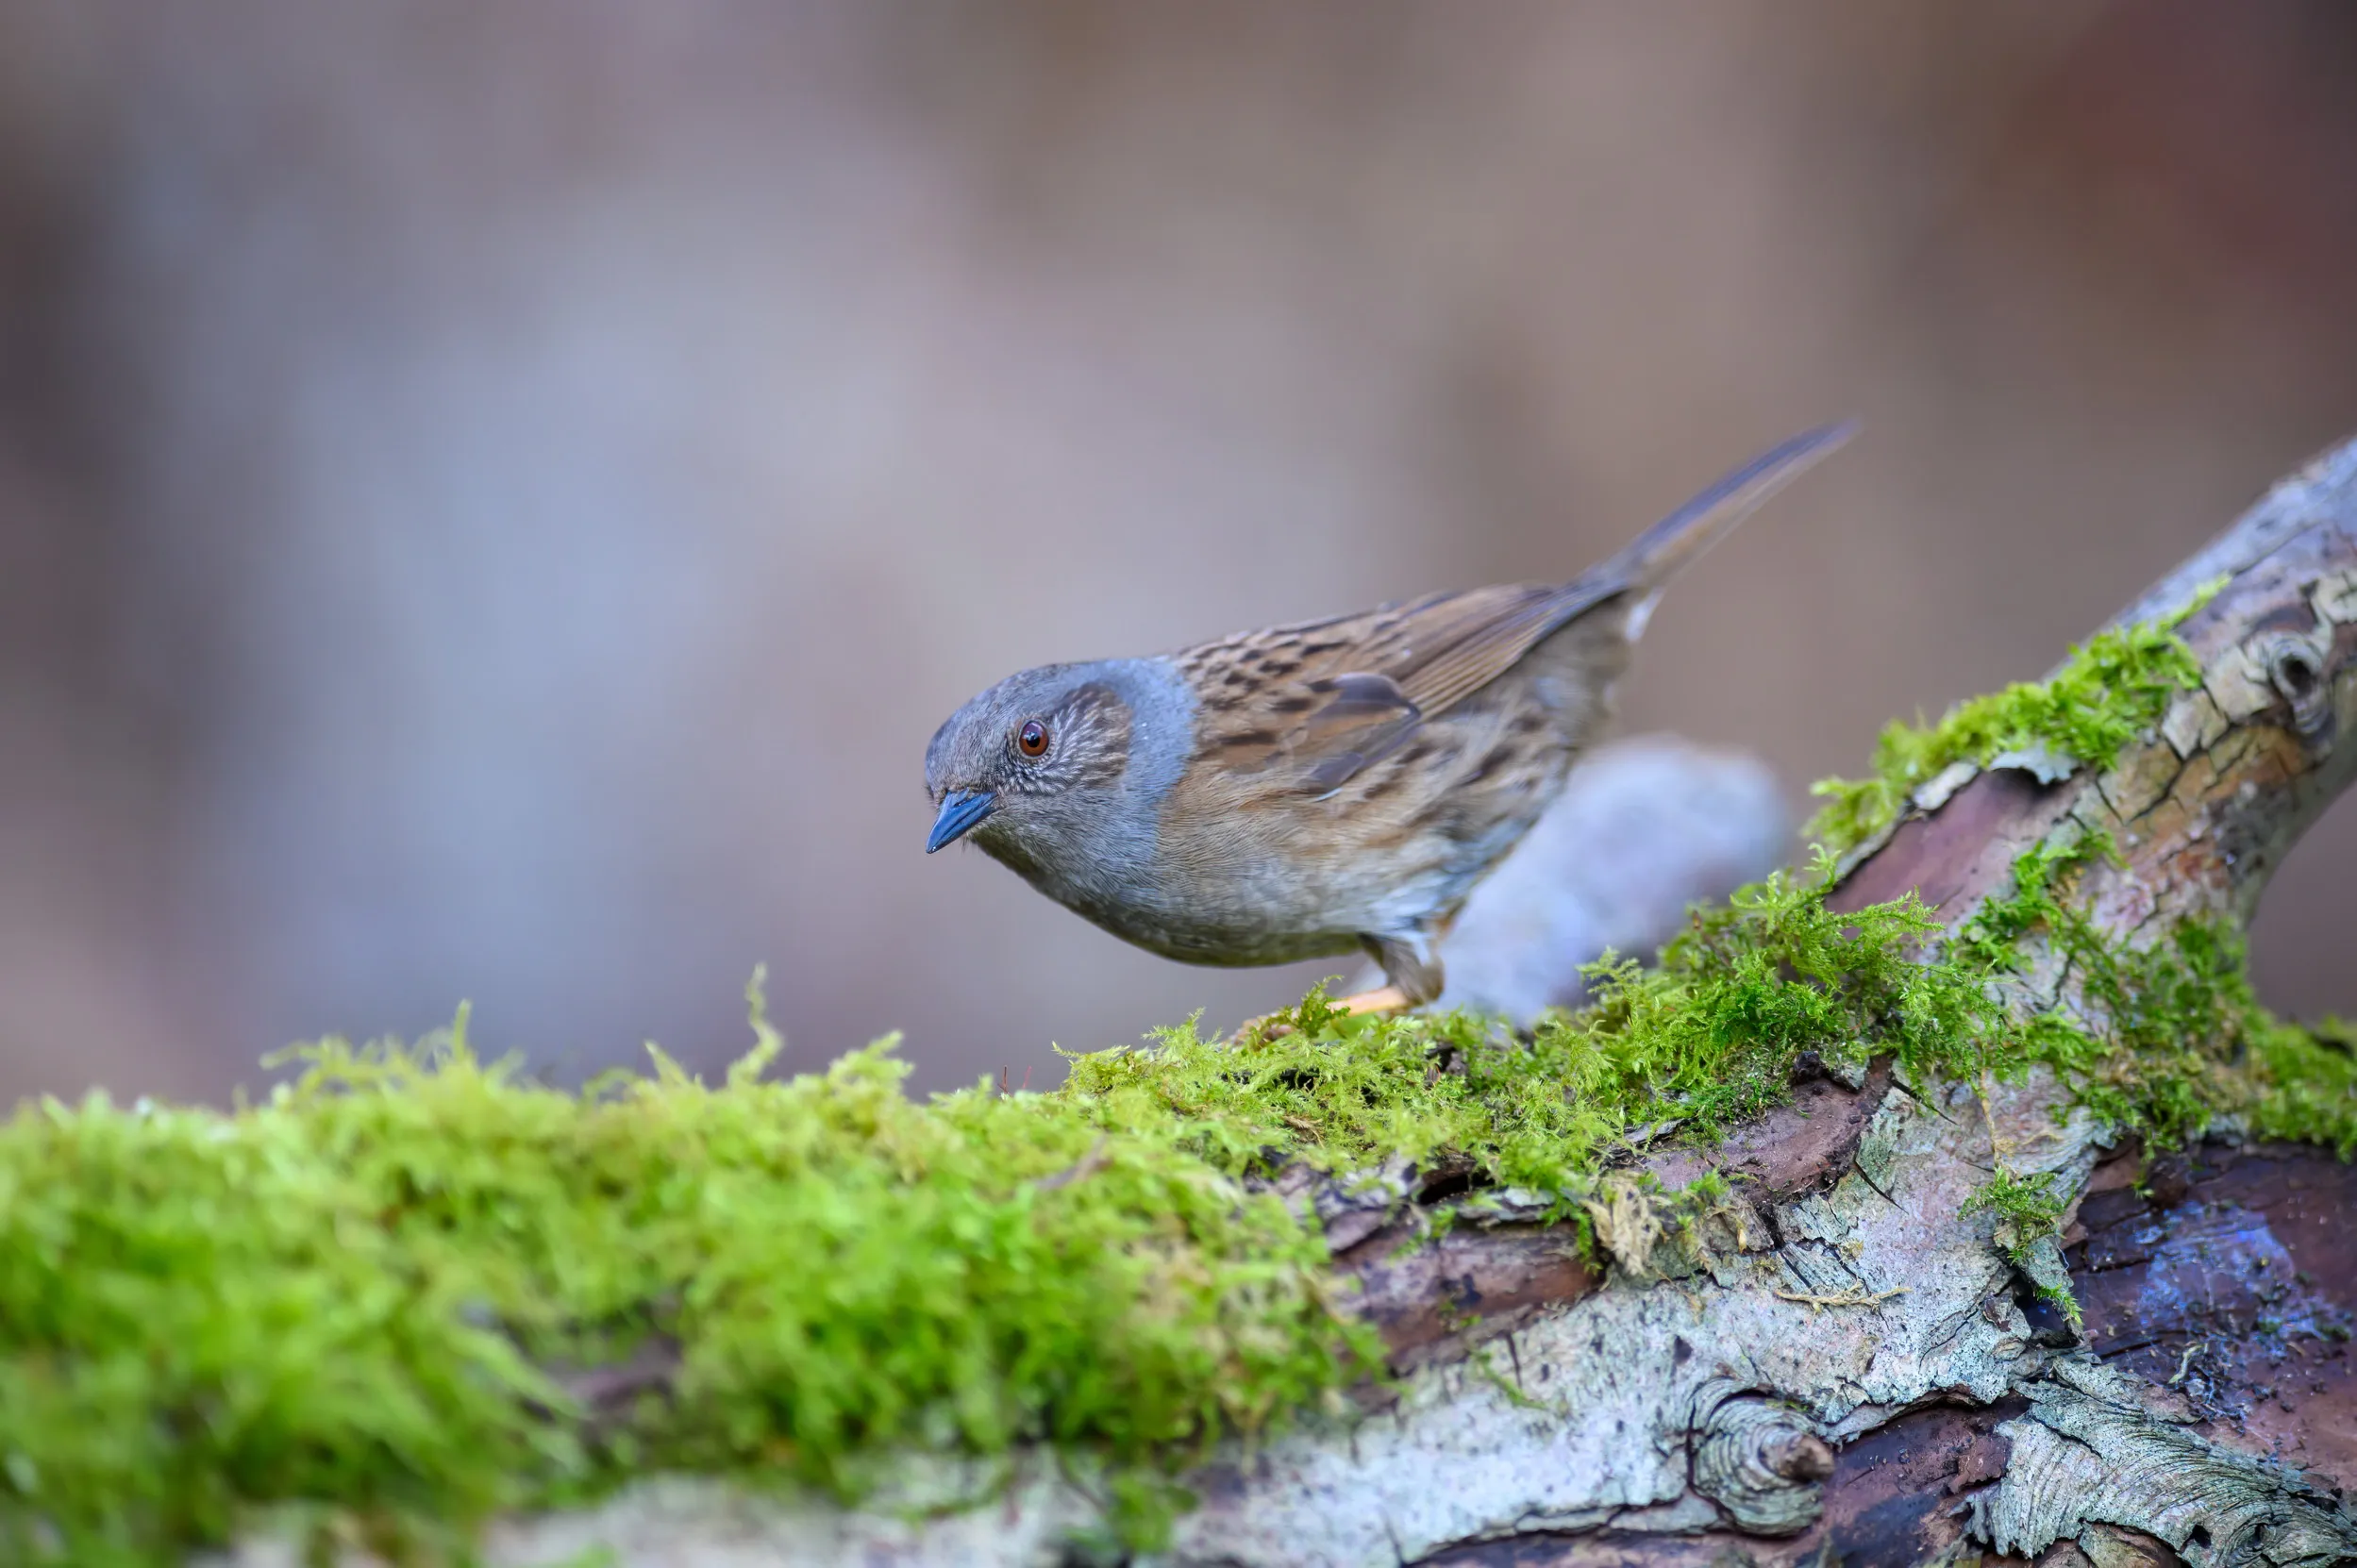 A Dunnock perched on a moss covered log.